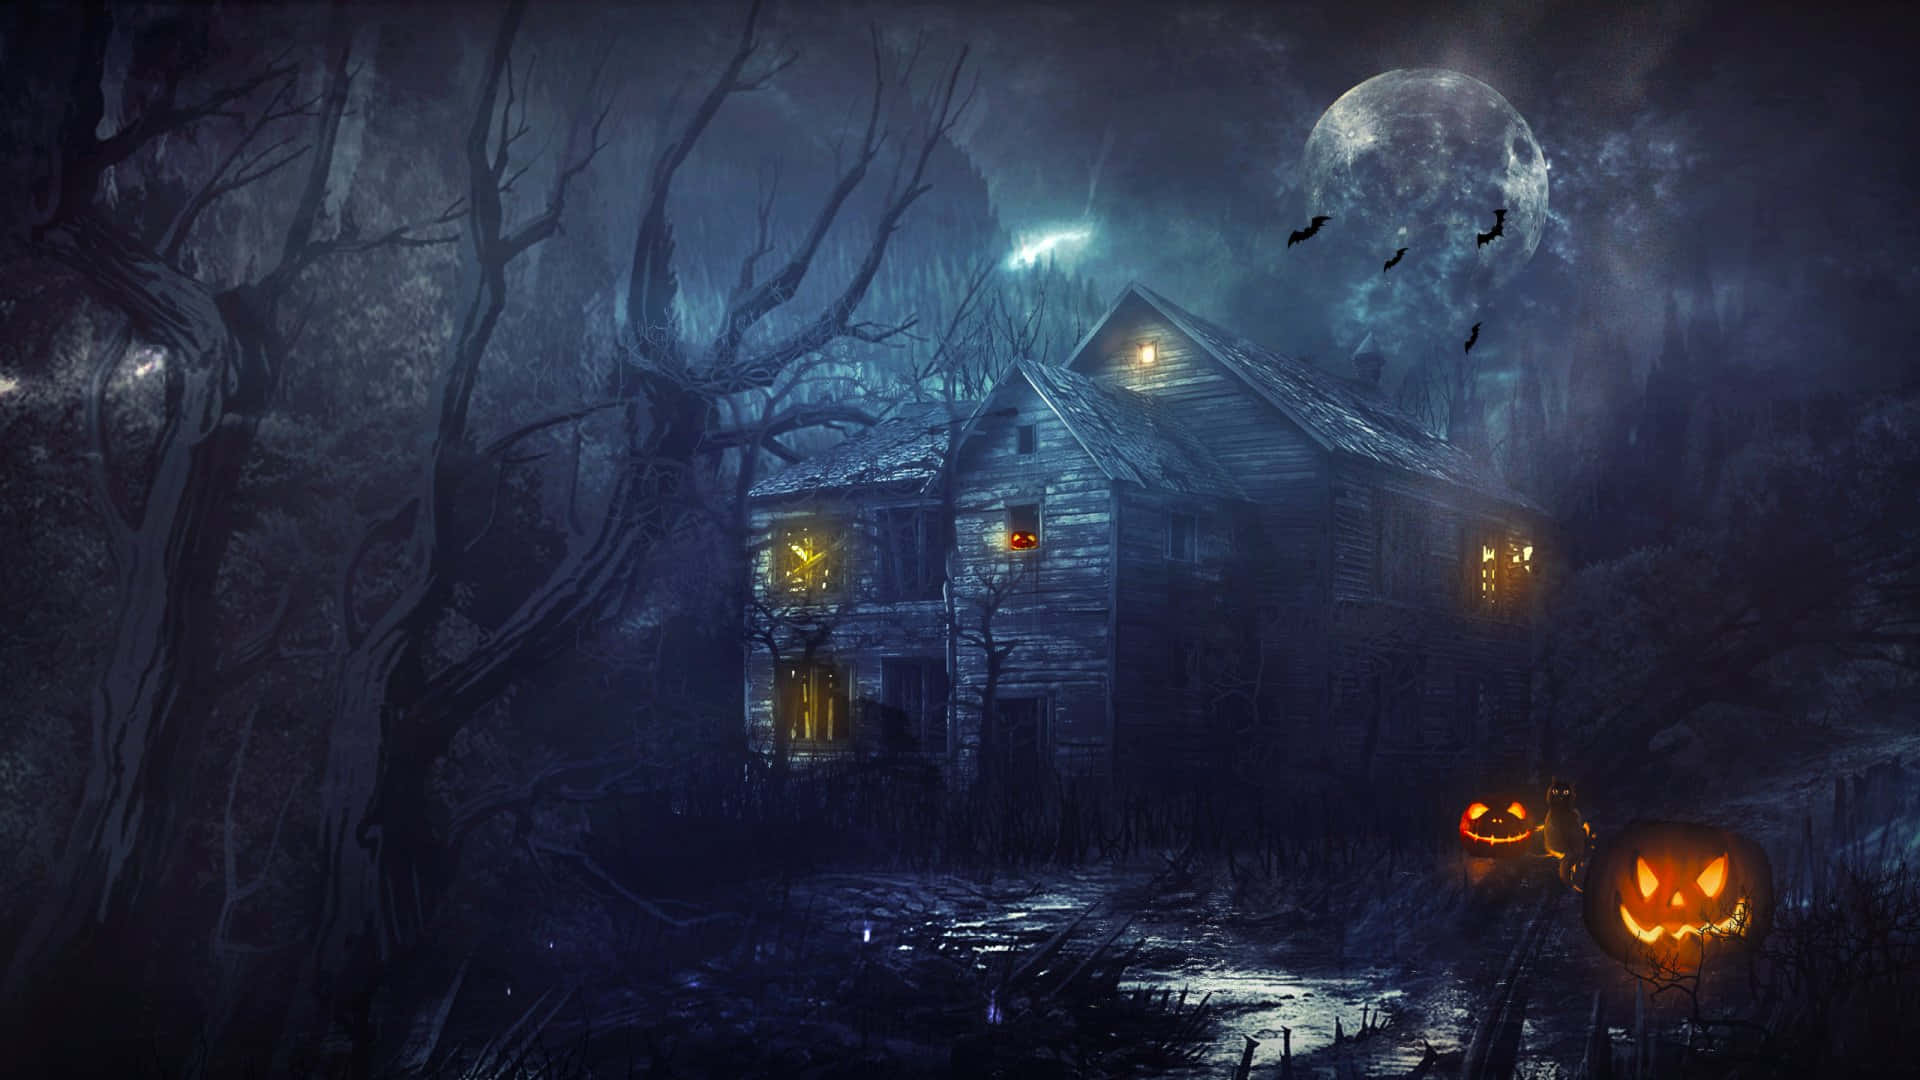 "Spooky Sightings in Haunted Forests" Wallpaper